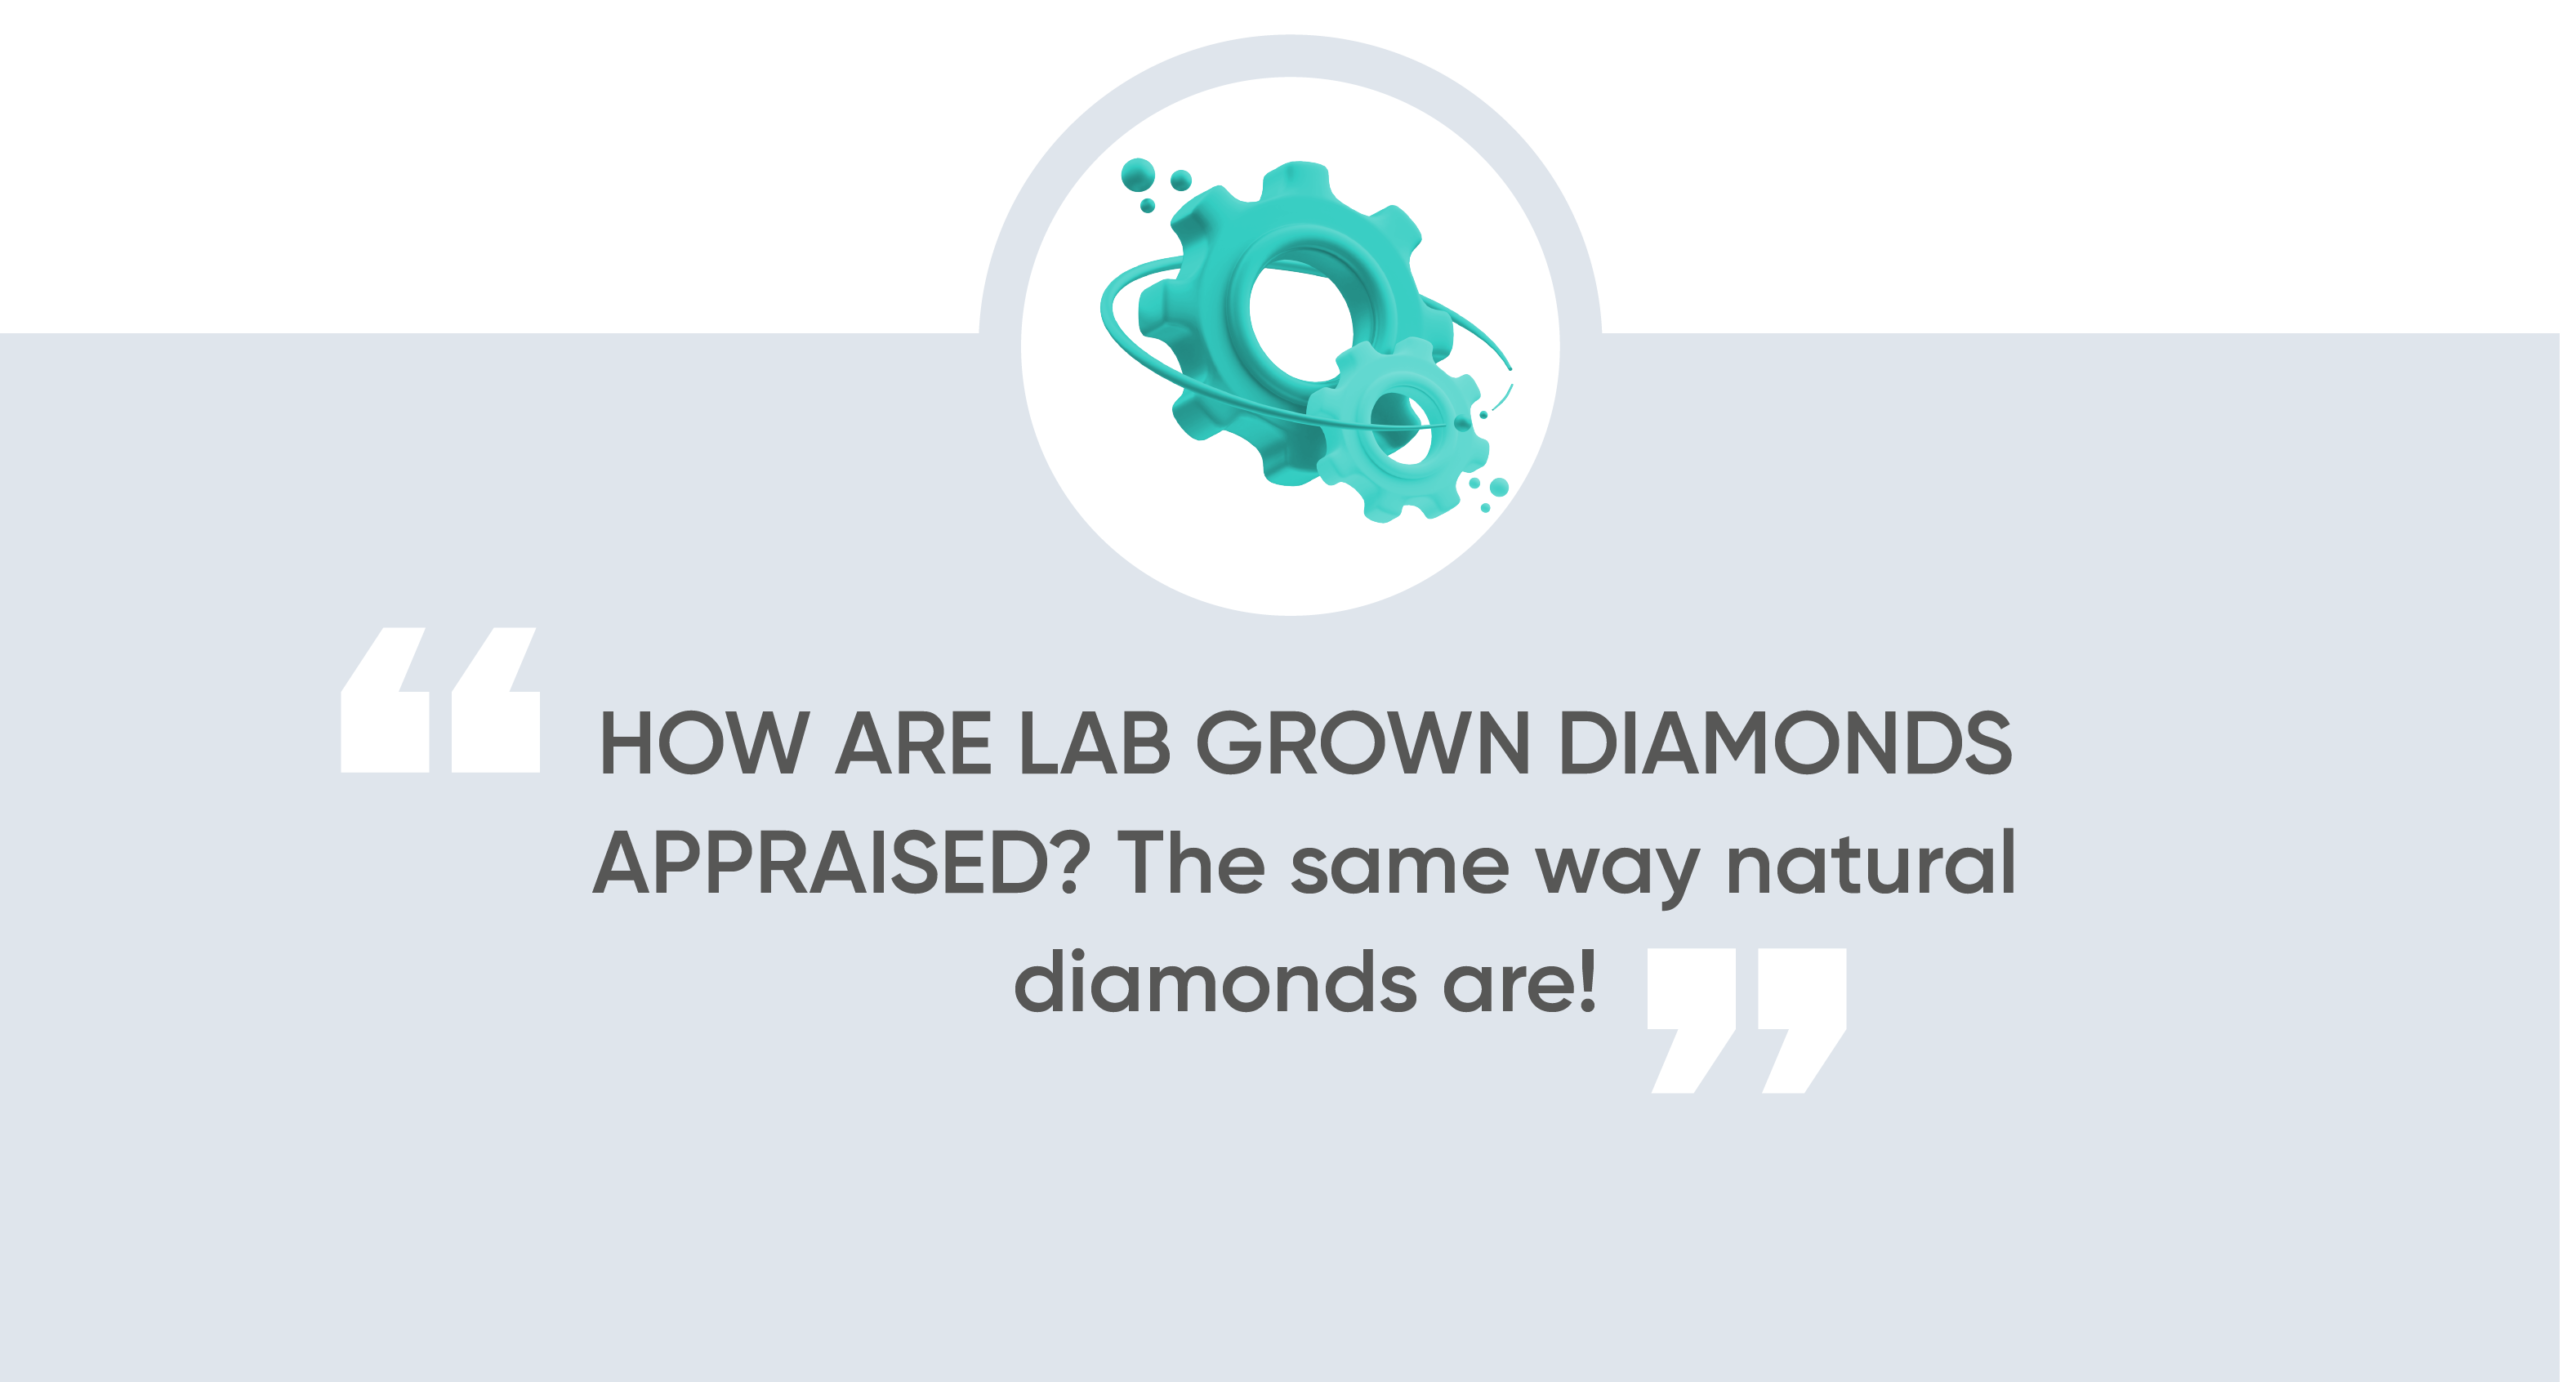 How are lab grown diamonds appraised?